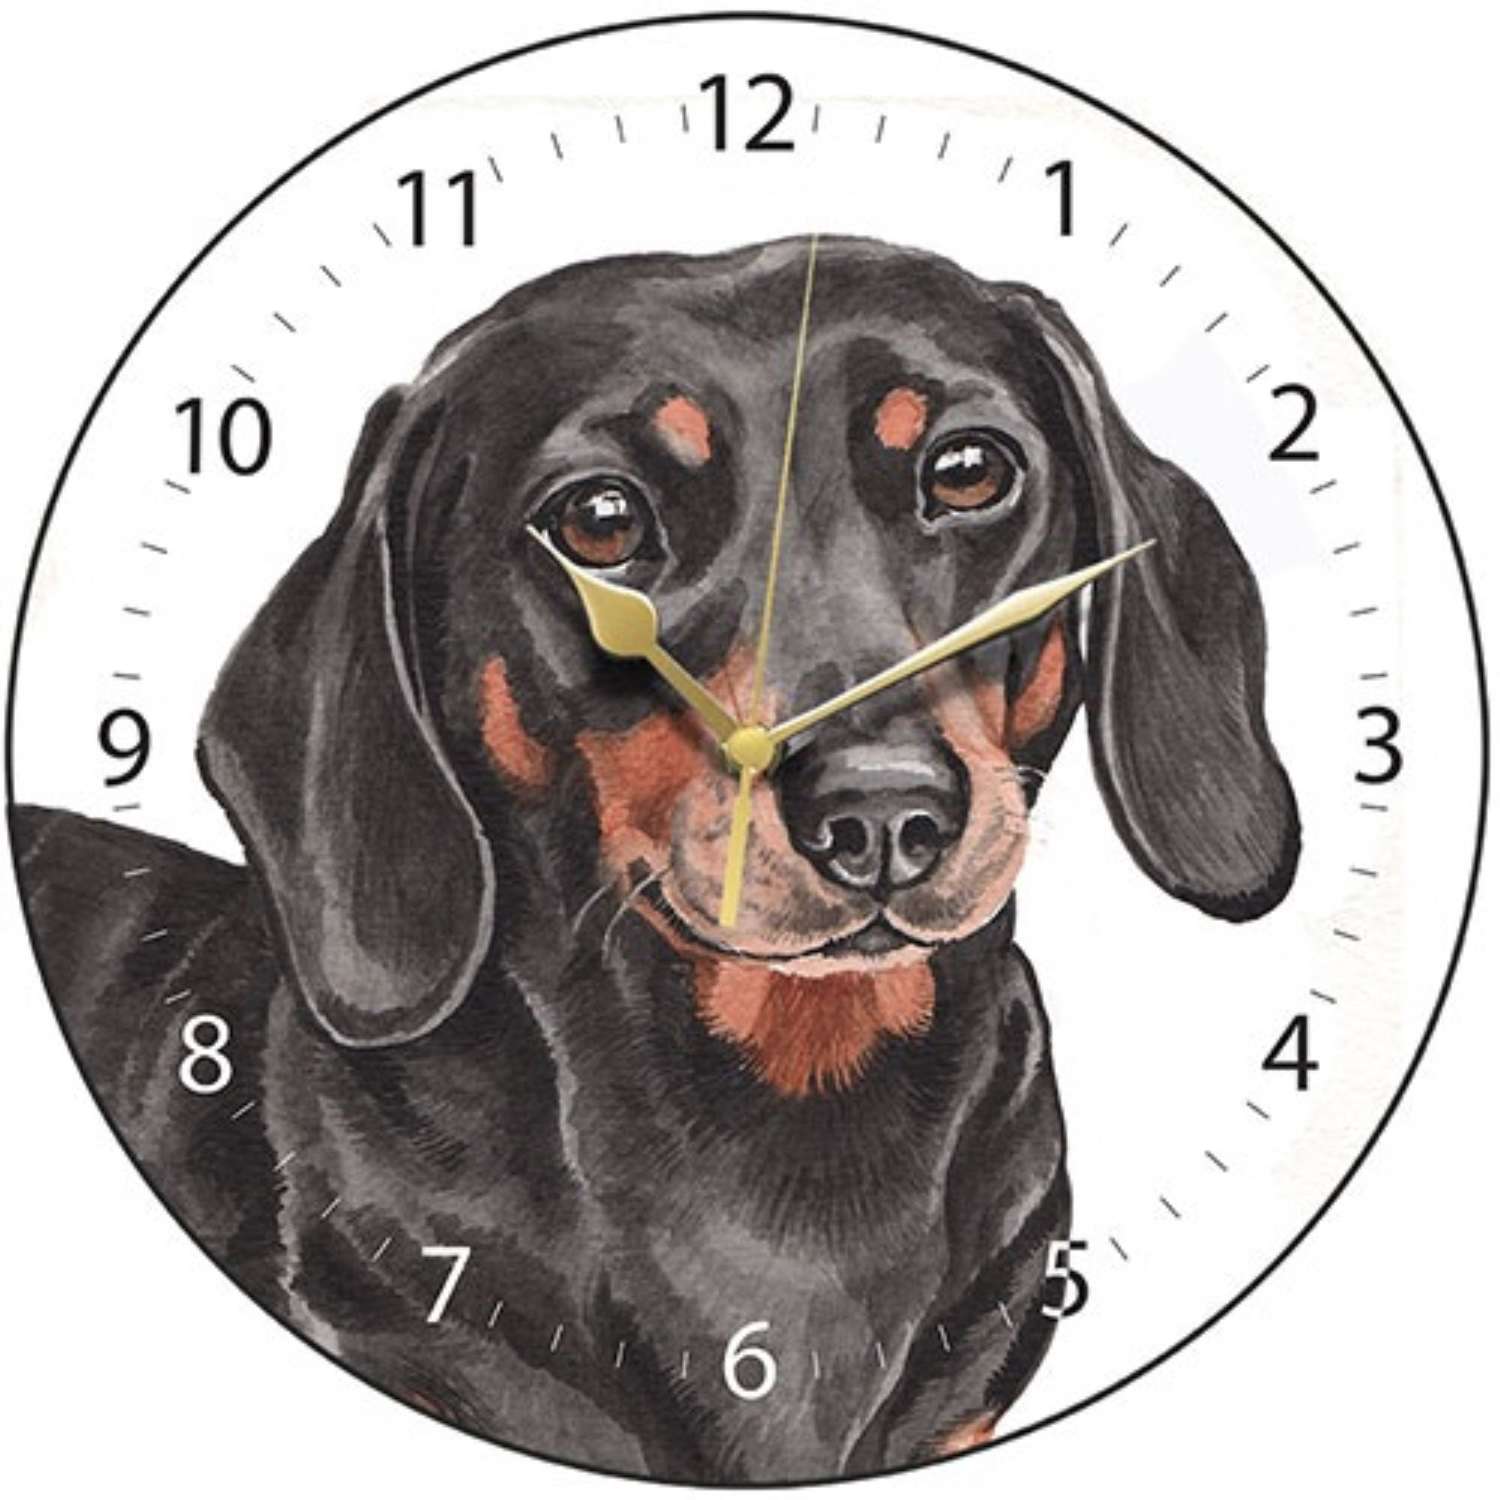 Dachshund Wall Clock. Made in the UK